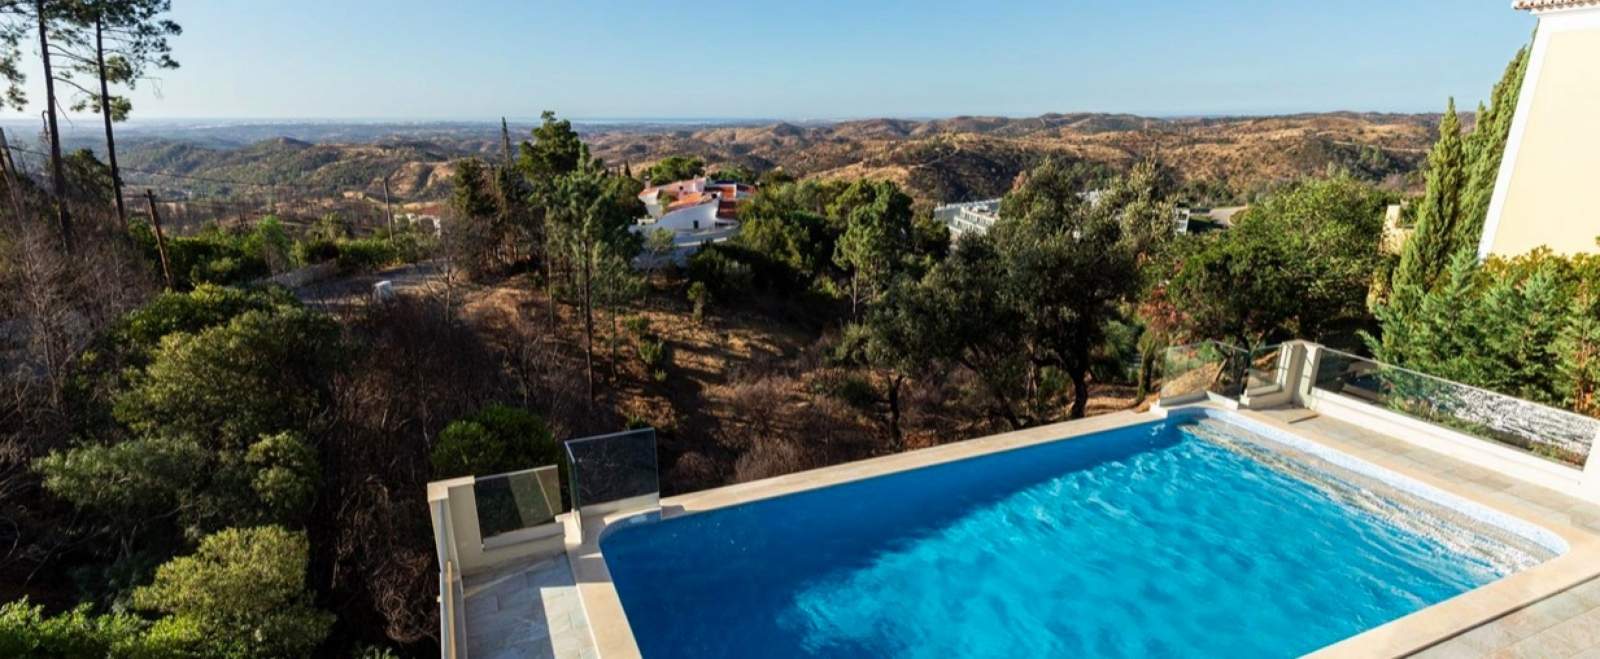 4 Bedroom Villa with swimming pool, new construction, for sale, Monchique, Algarve_191589